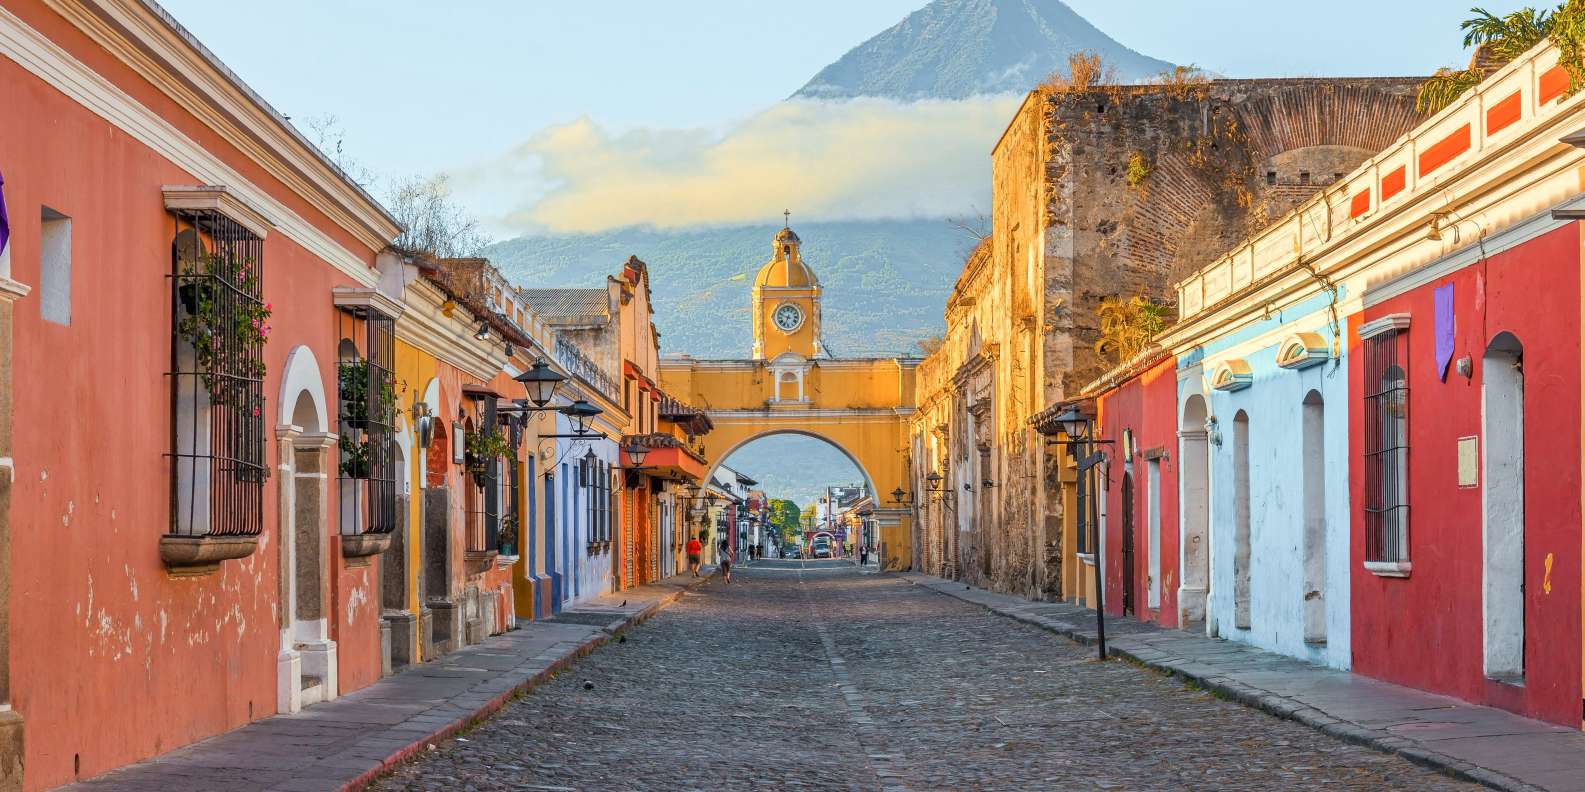 The BEST Guatemala Good for groups 2023 FREE Cancellation GetYourGuide